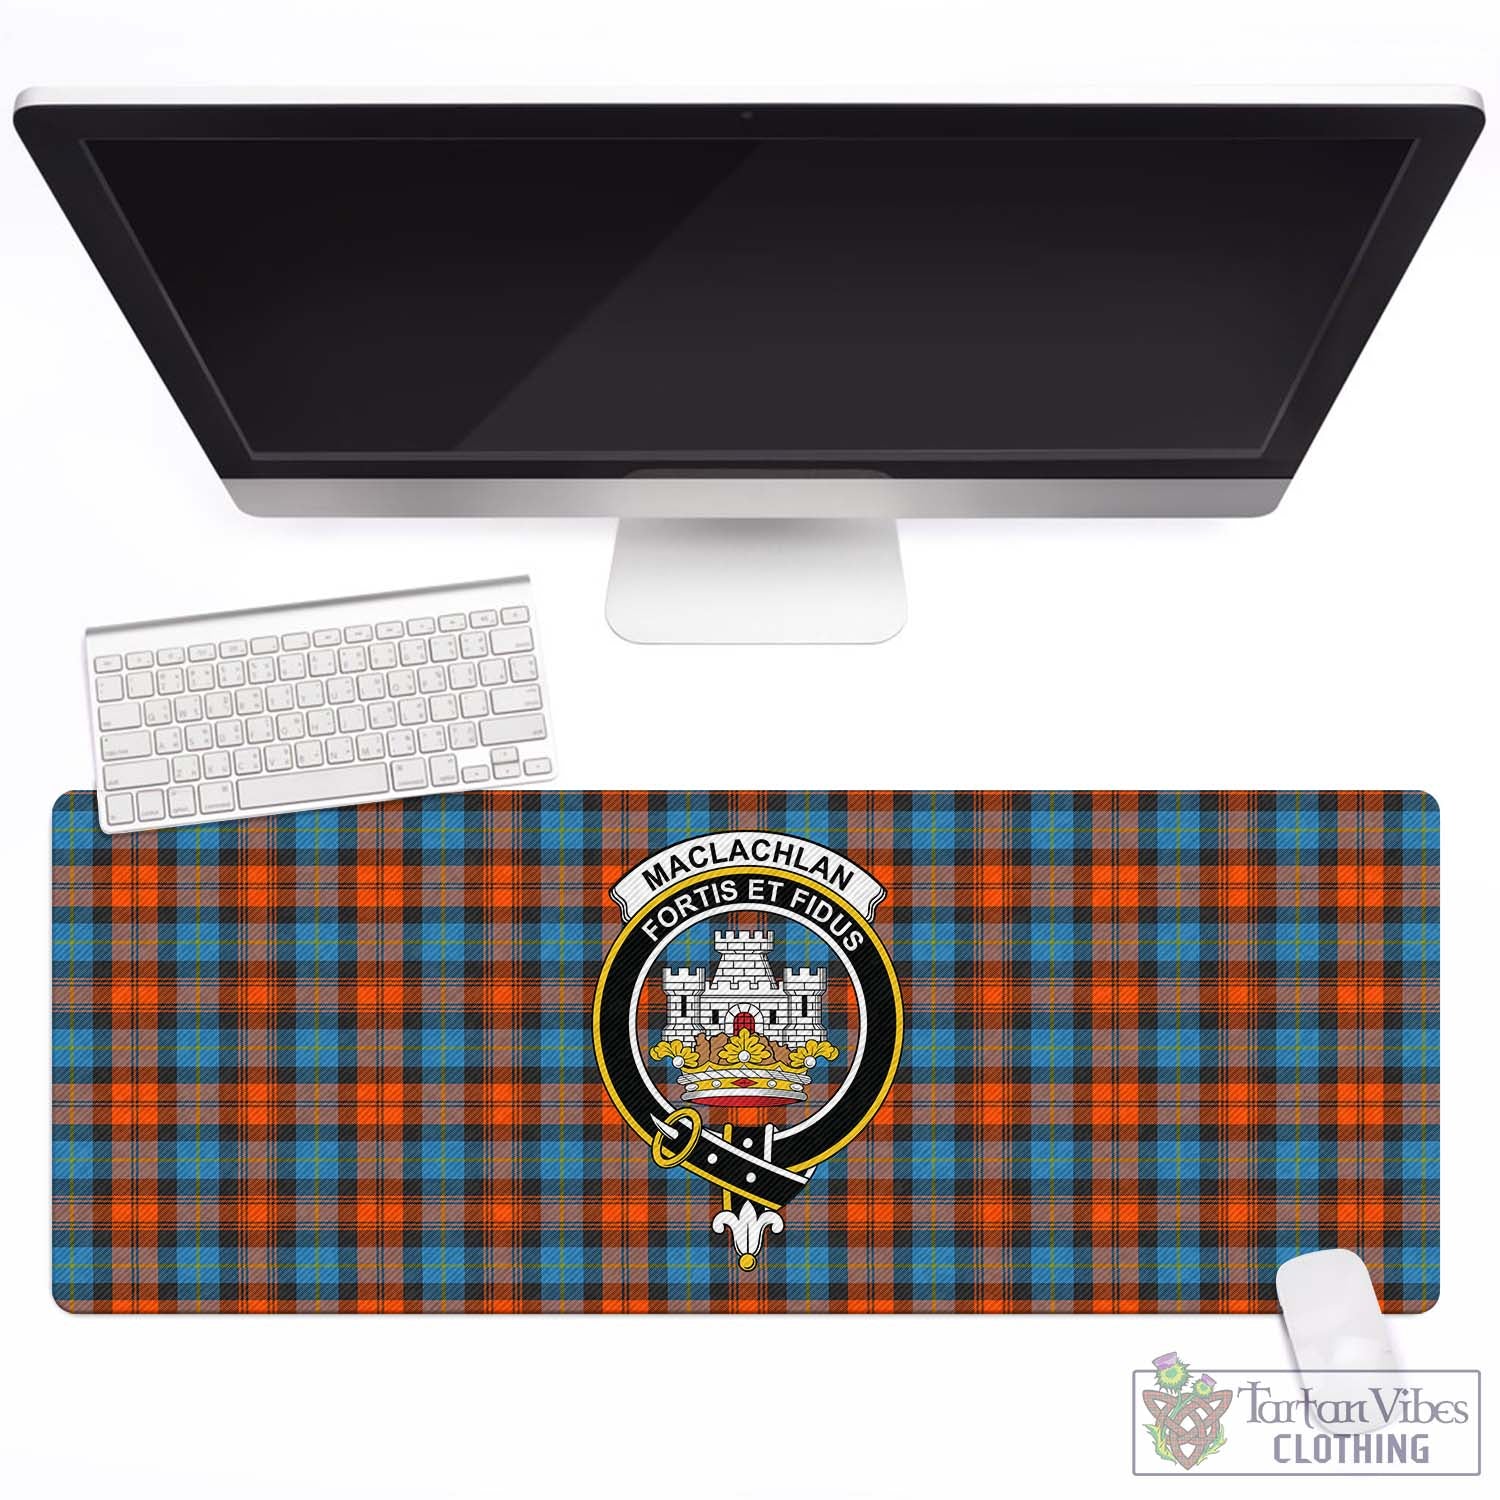 Tartan Vibes Clothing MacLachlan Ancient Tartan Mouse Pad with Family Crest